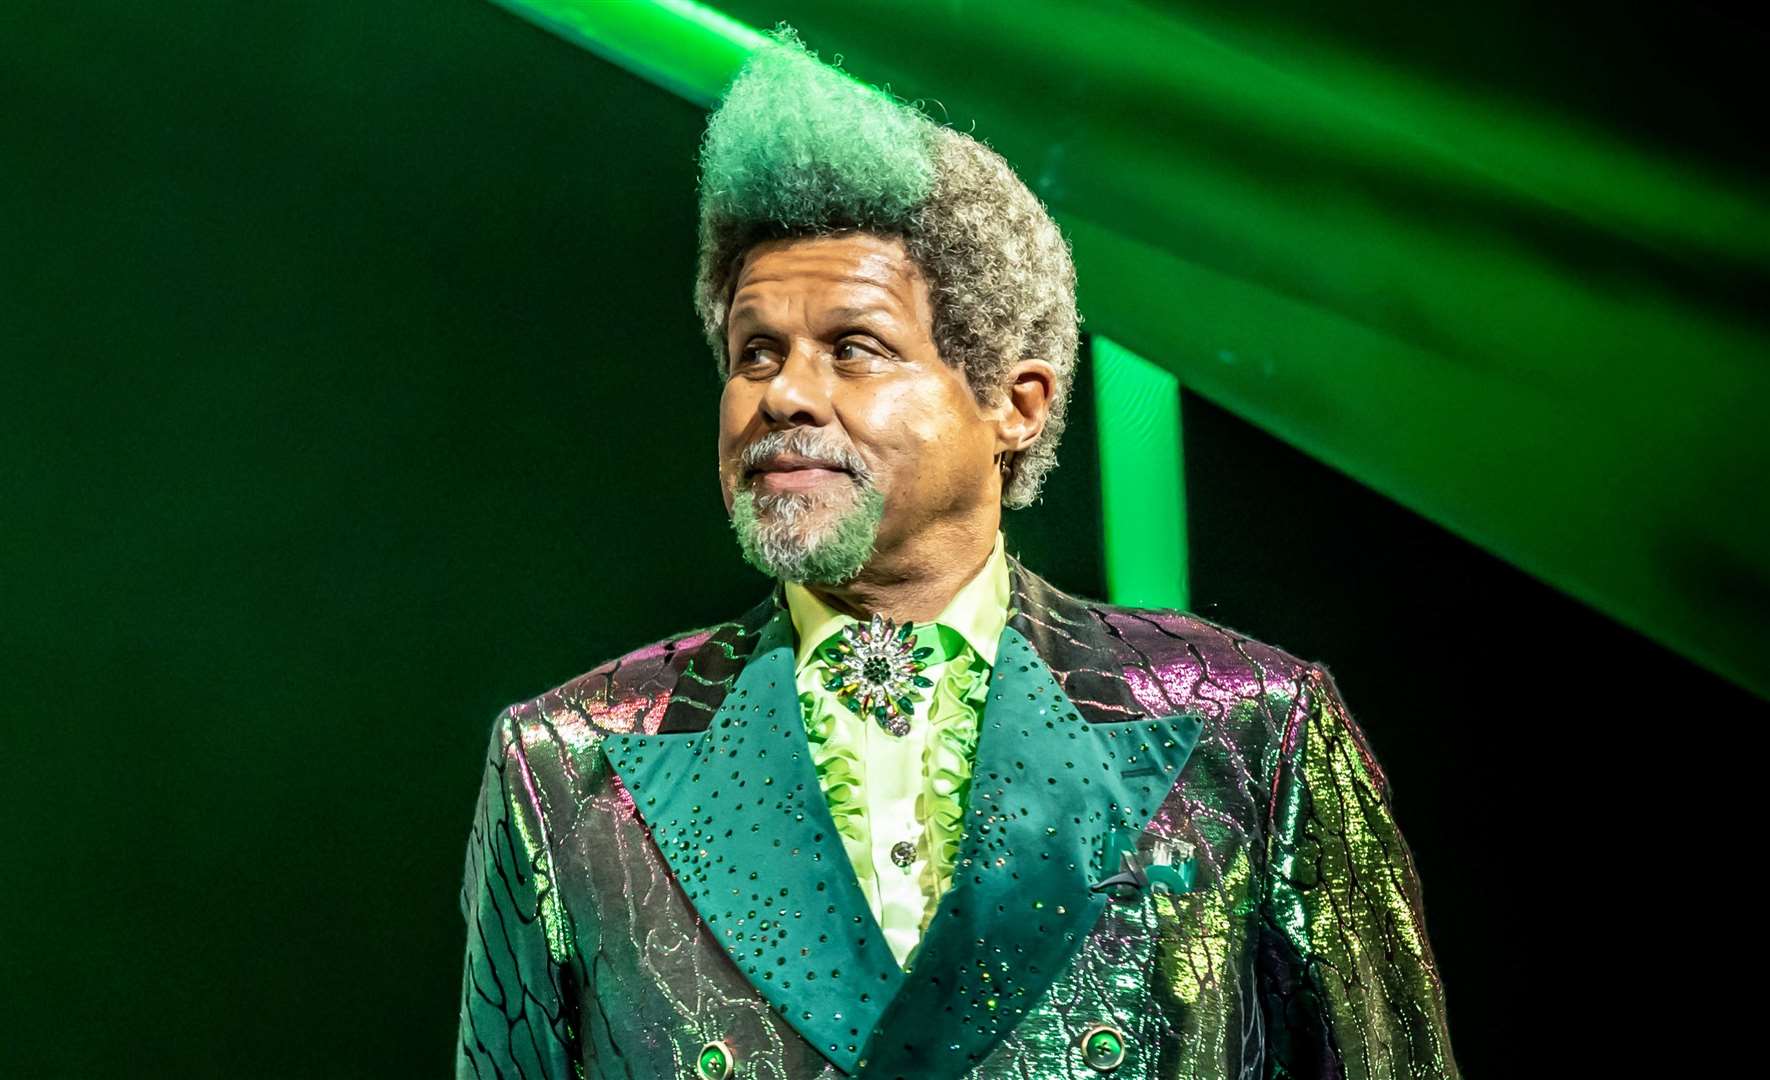 TV presenter Gary Wilmot reprises his role as The Wizard. Picture: Marc Brenner